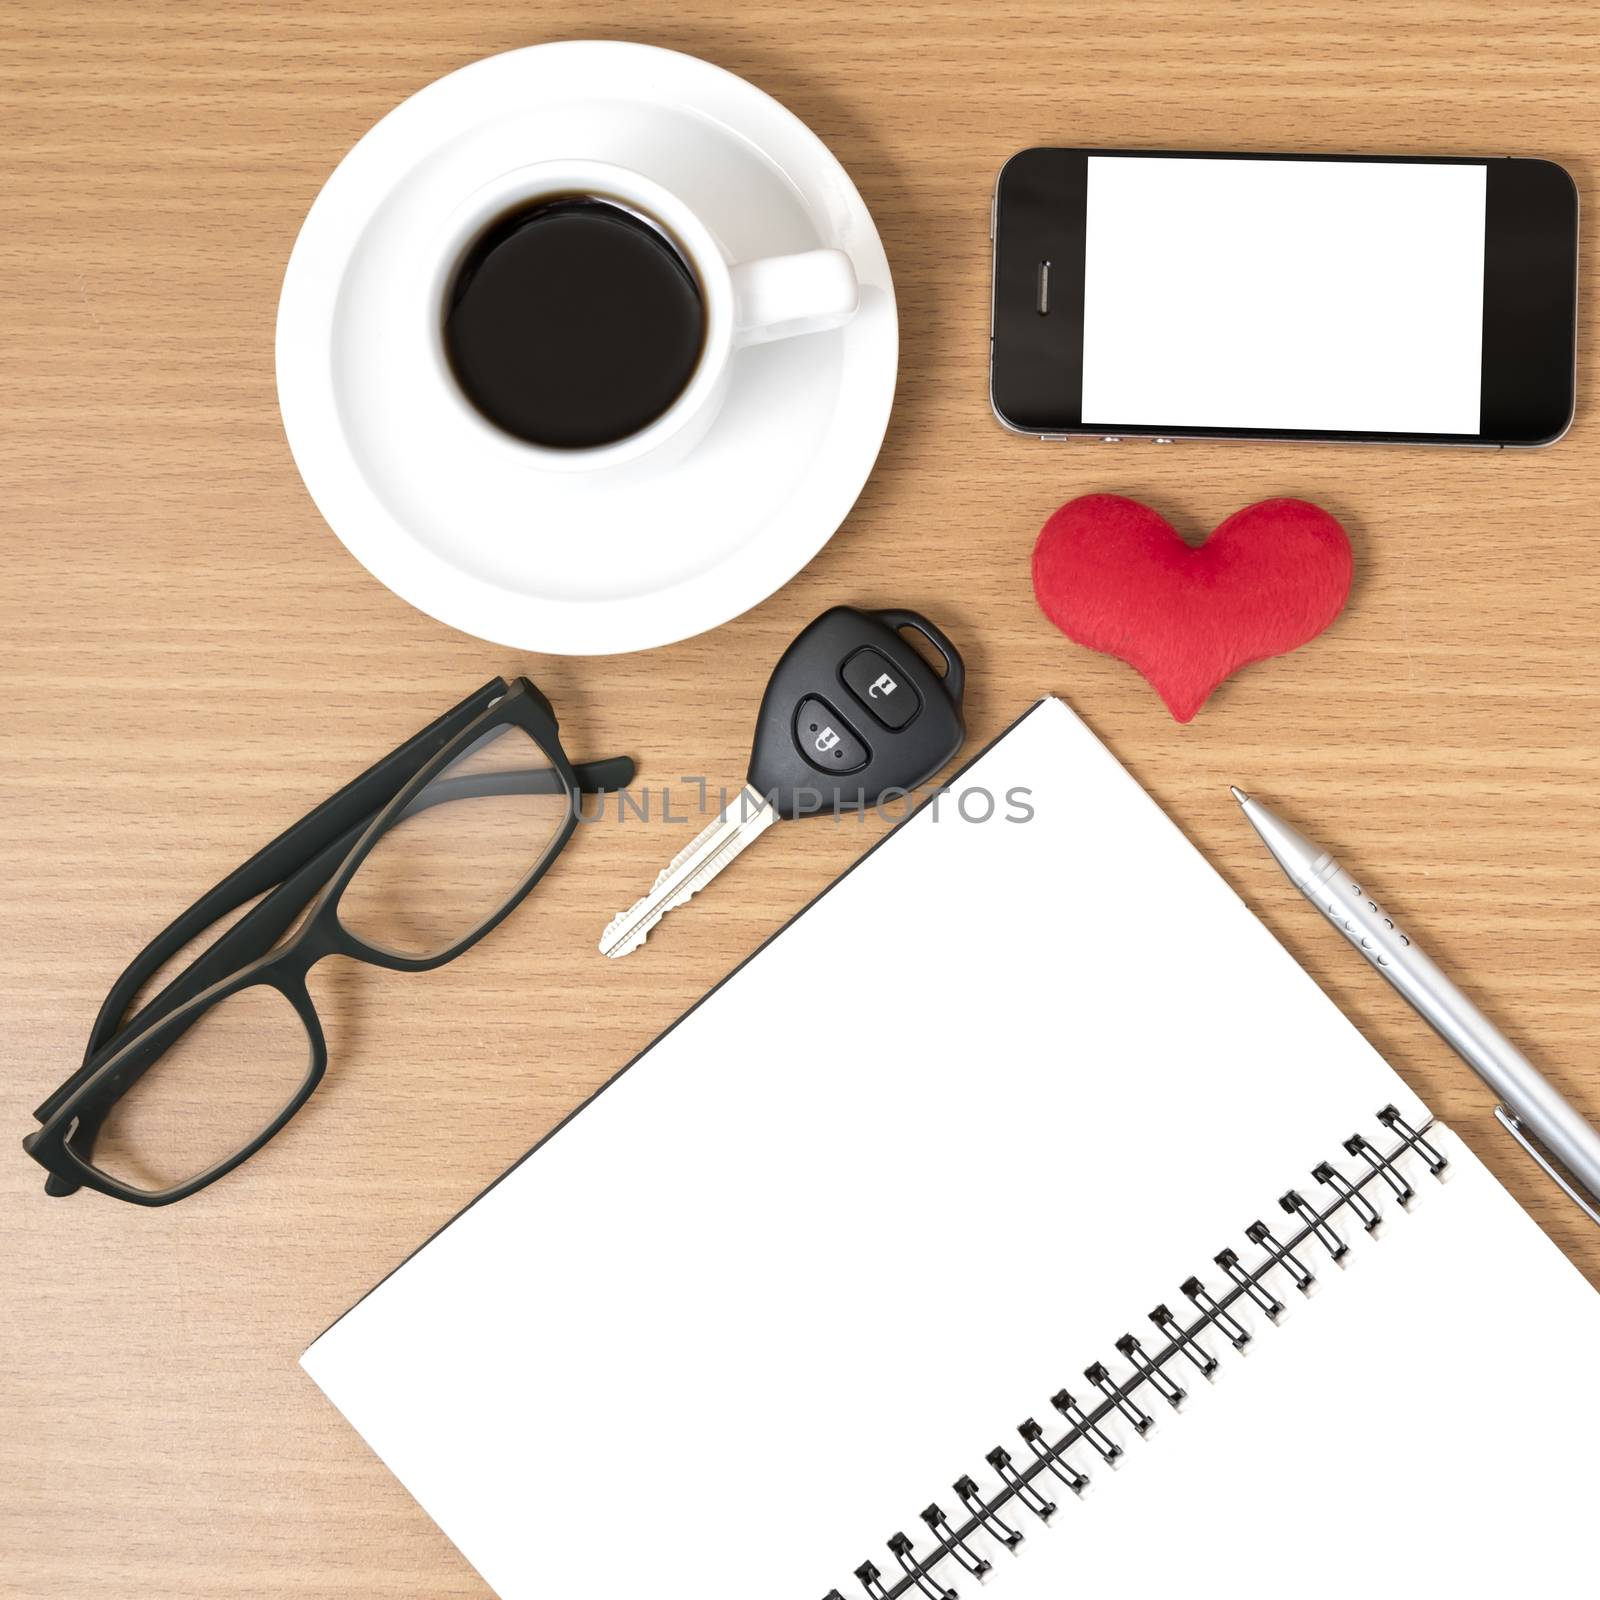 office desk : coffee and phone with car key,eyeglasses,notepad,h by ammza12